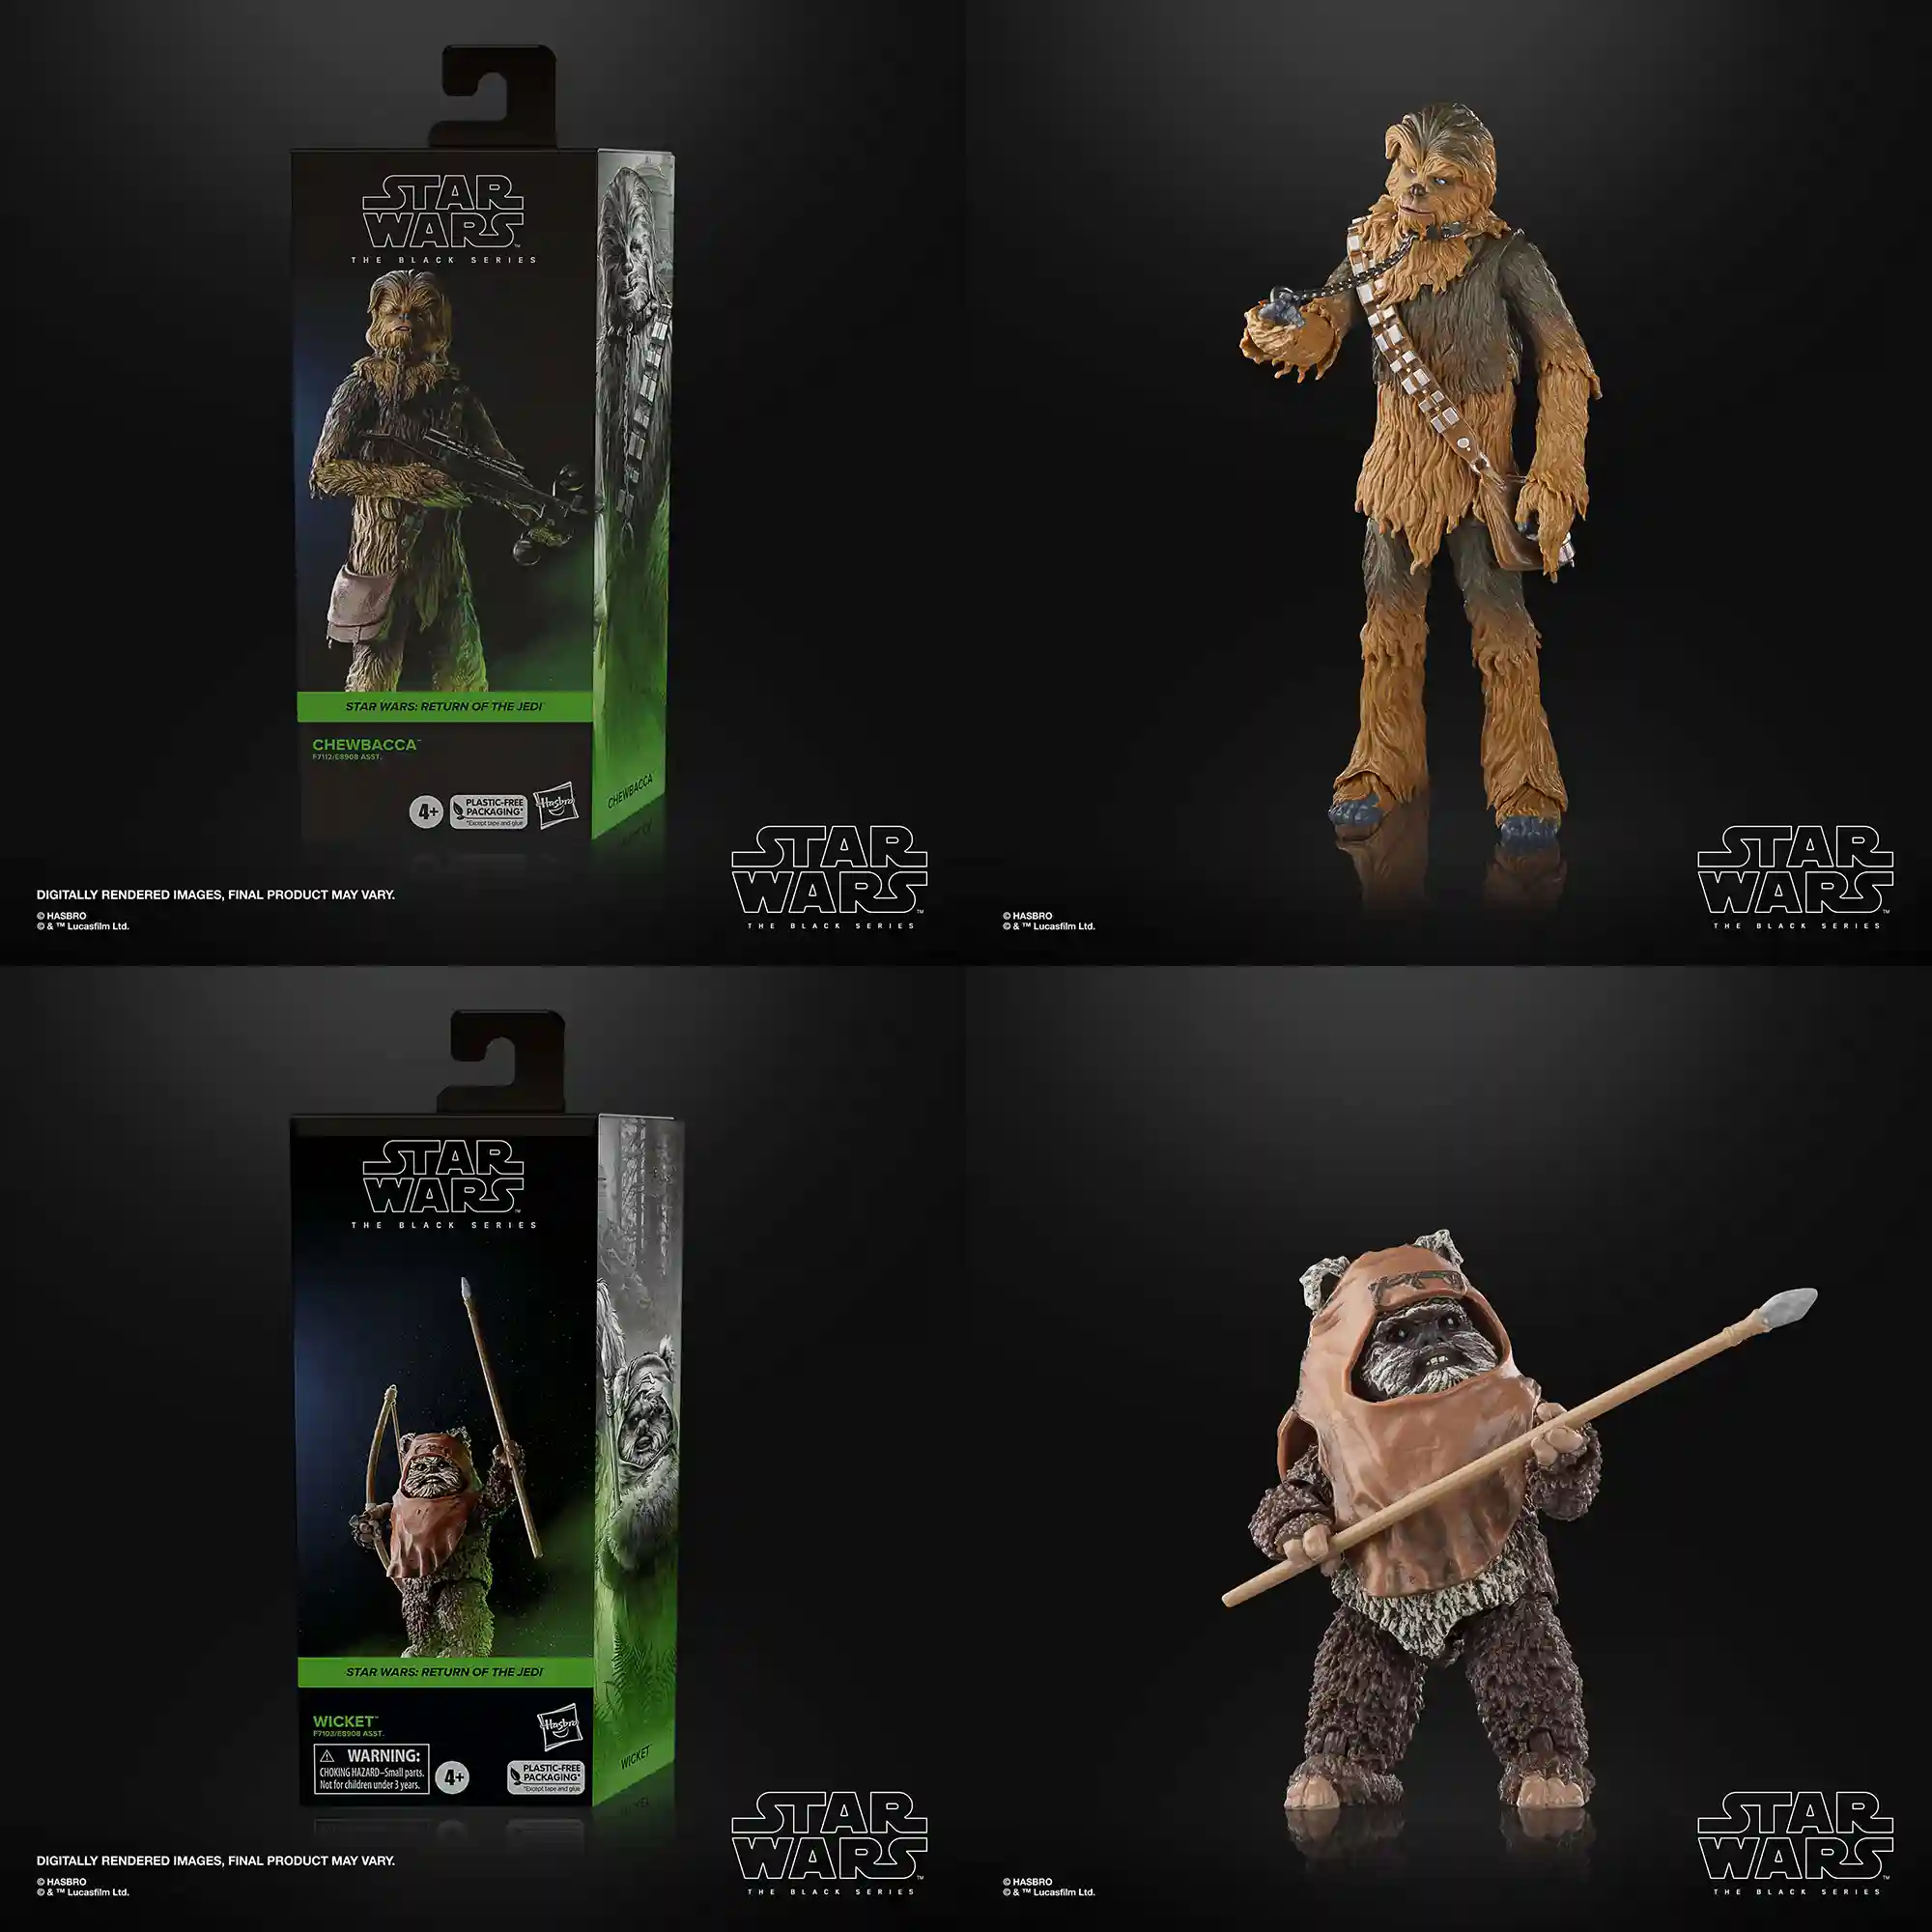 The Black Series Chewbacca and Wicket